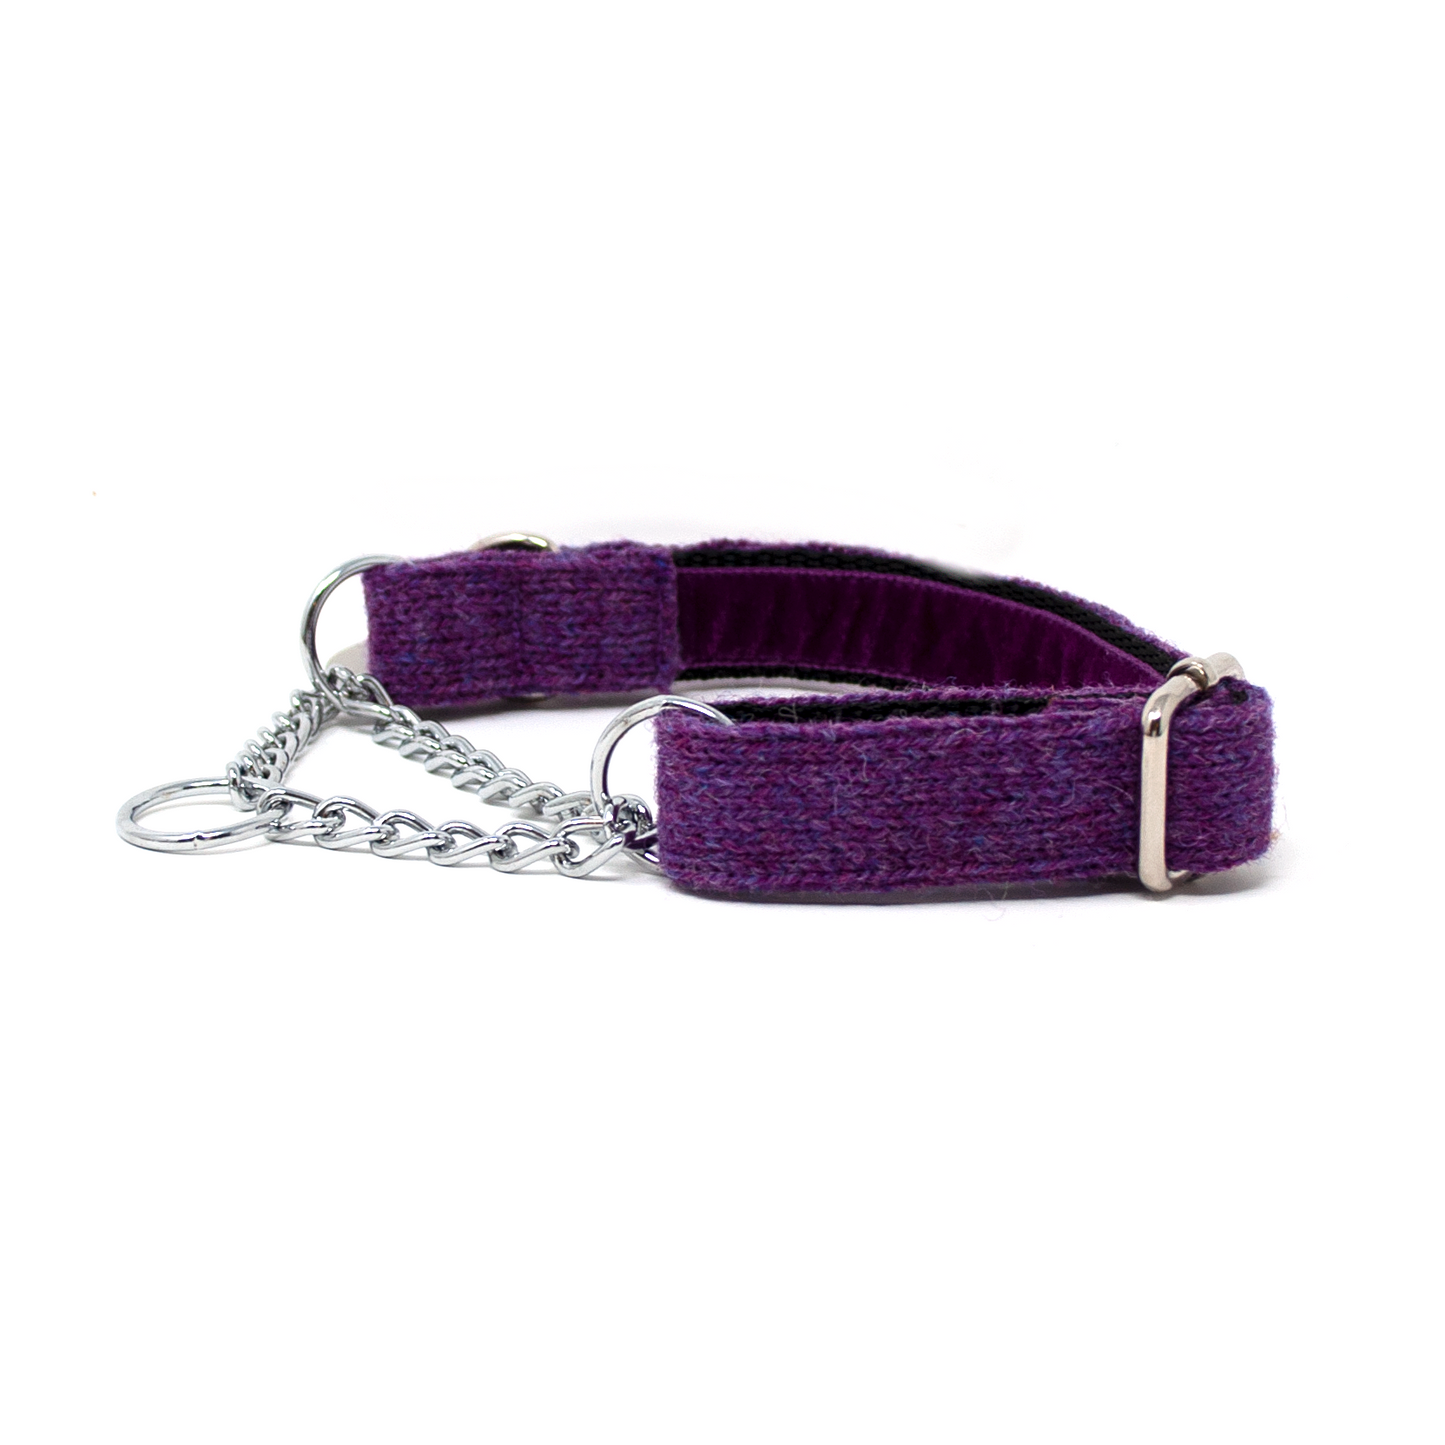 Parma - Autumn/Winter '23 Collection - Martingale Dog Collar